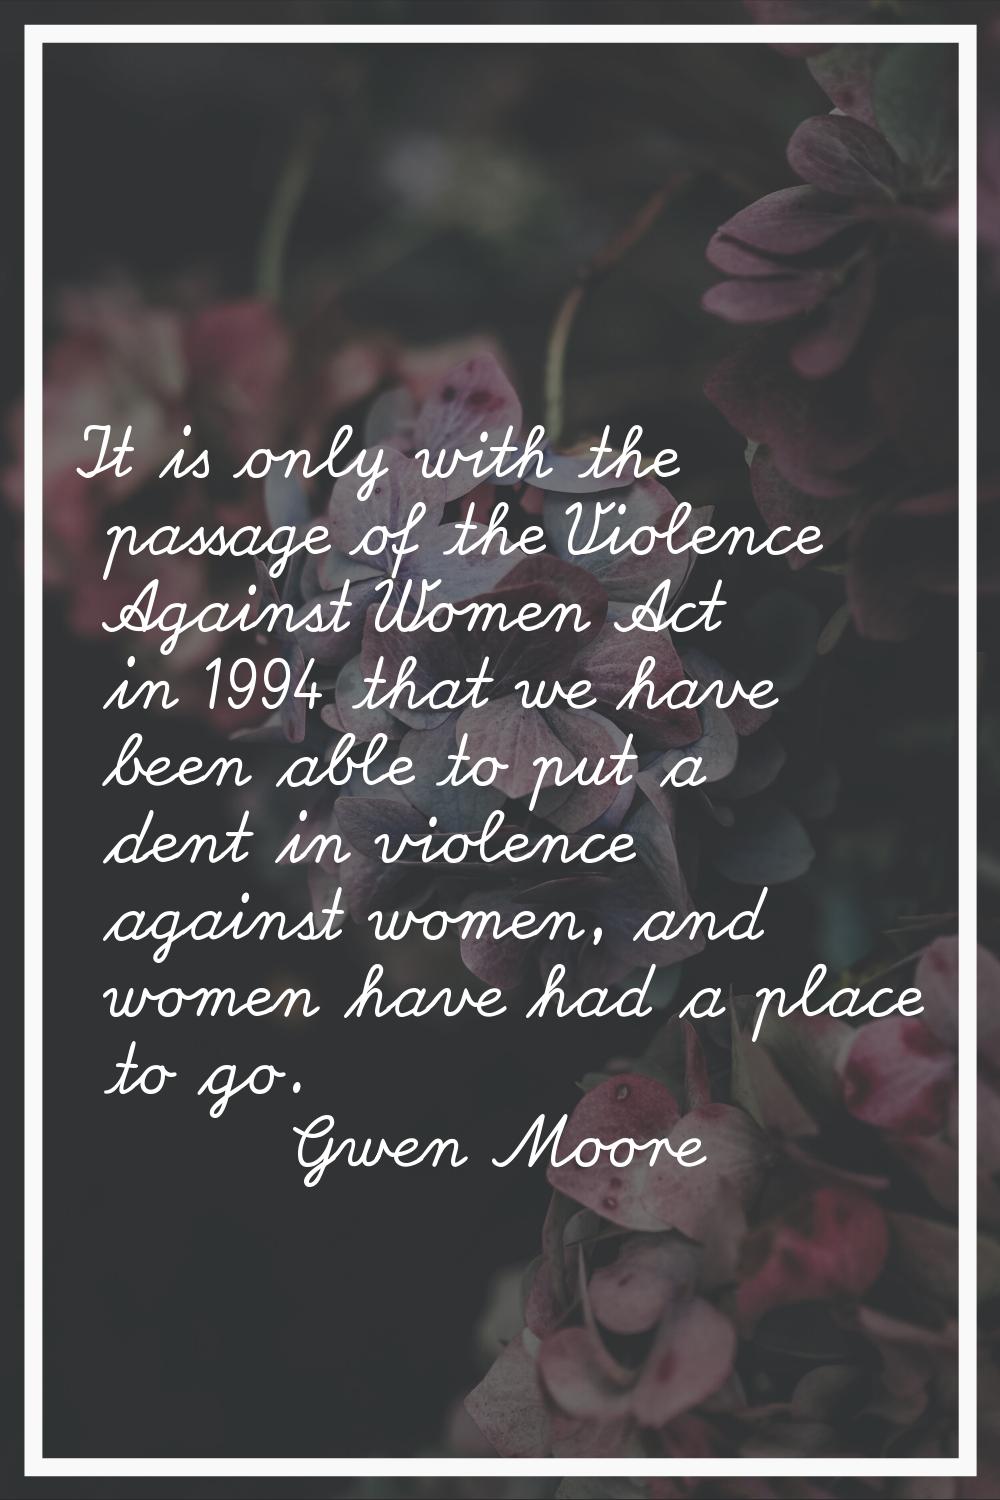 It is only with the passage of the Violence Against Women Act in 1994 that we have been able to put